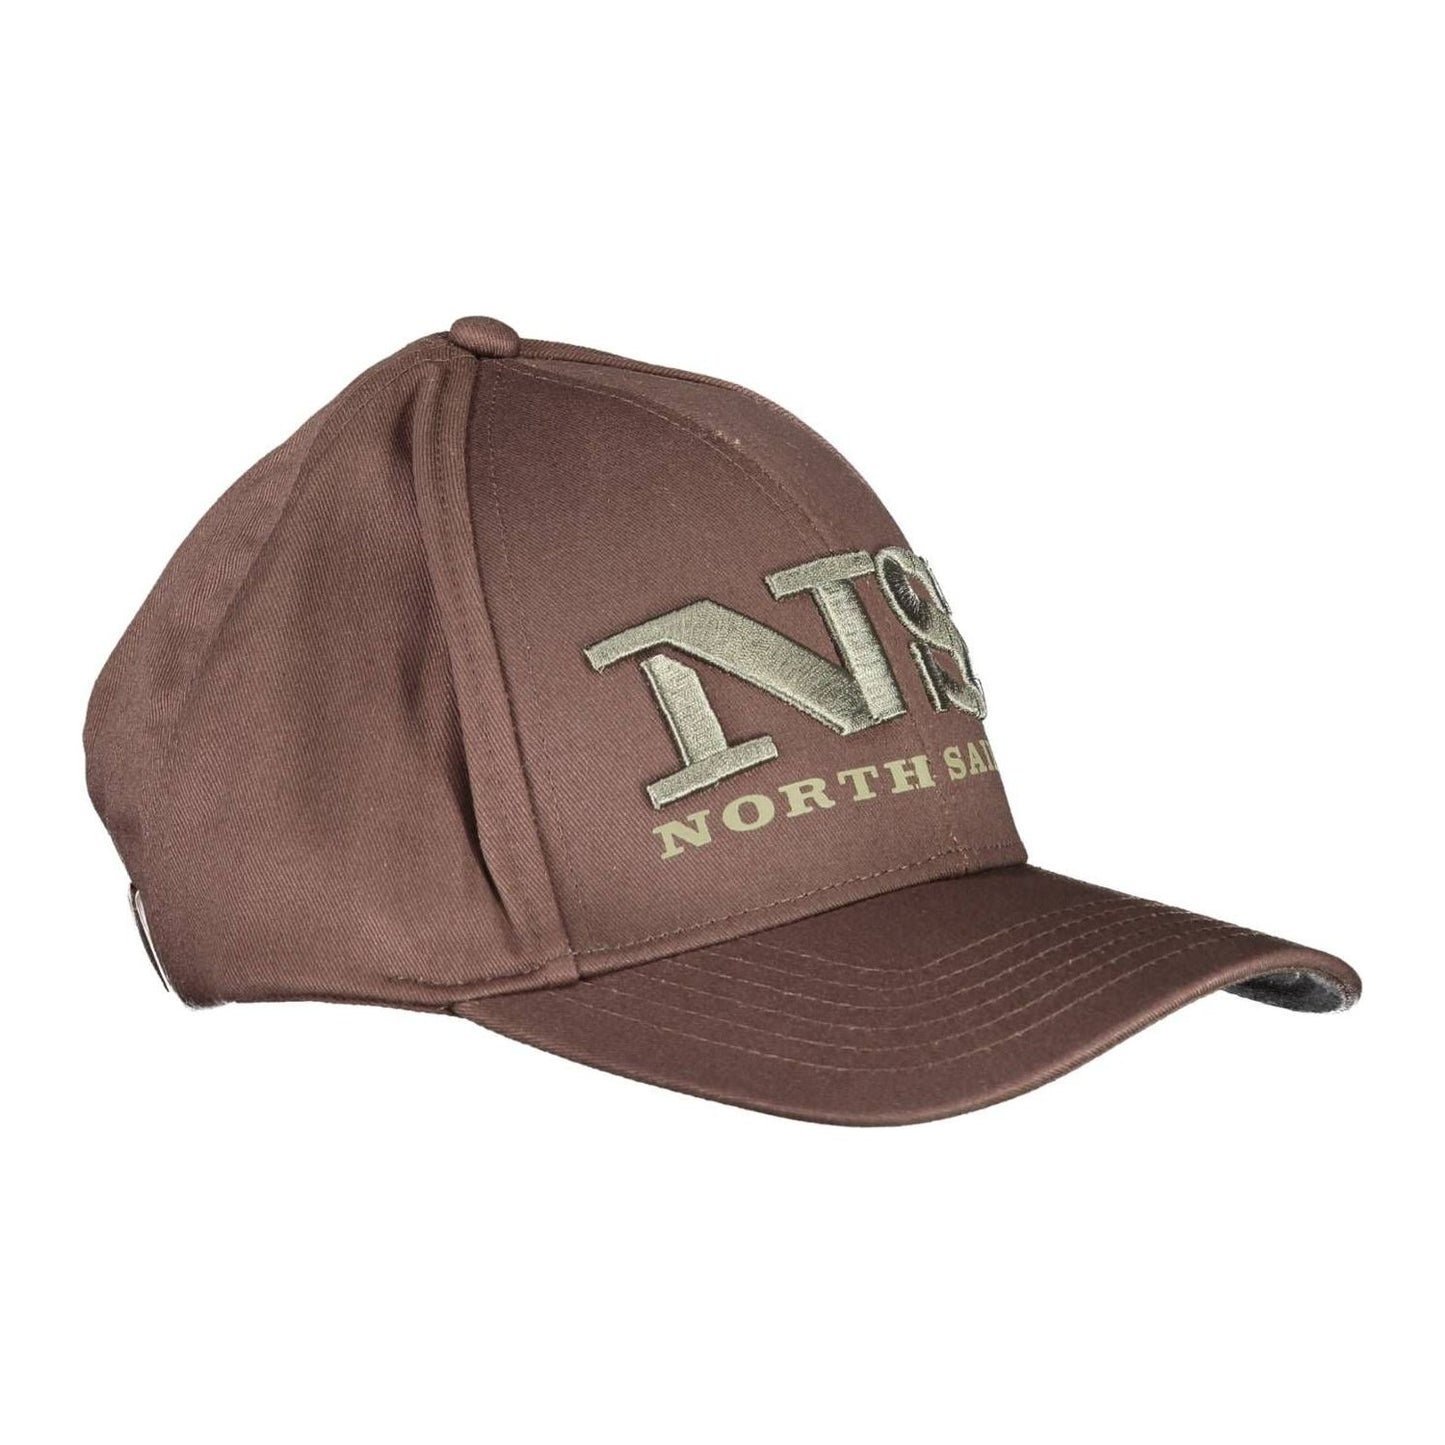 North Sails Chic Embroidered Cotton Cap with Visor chic-embroidered-cotton-cap-with-visor